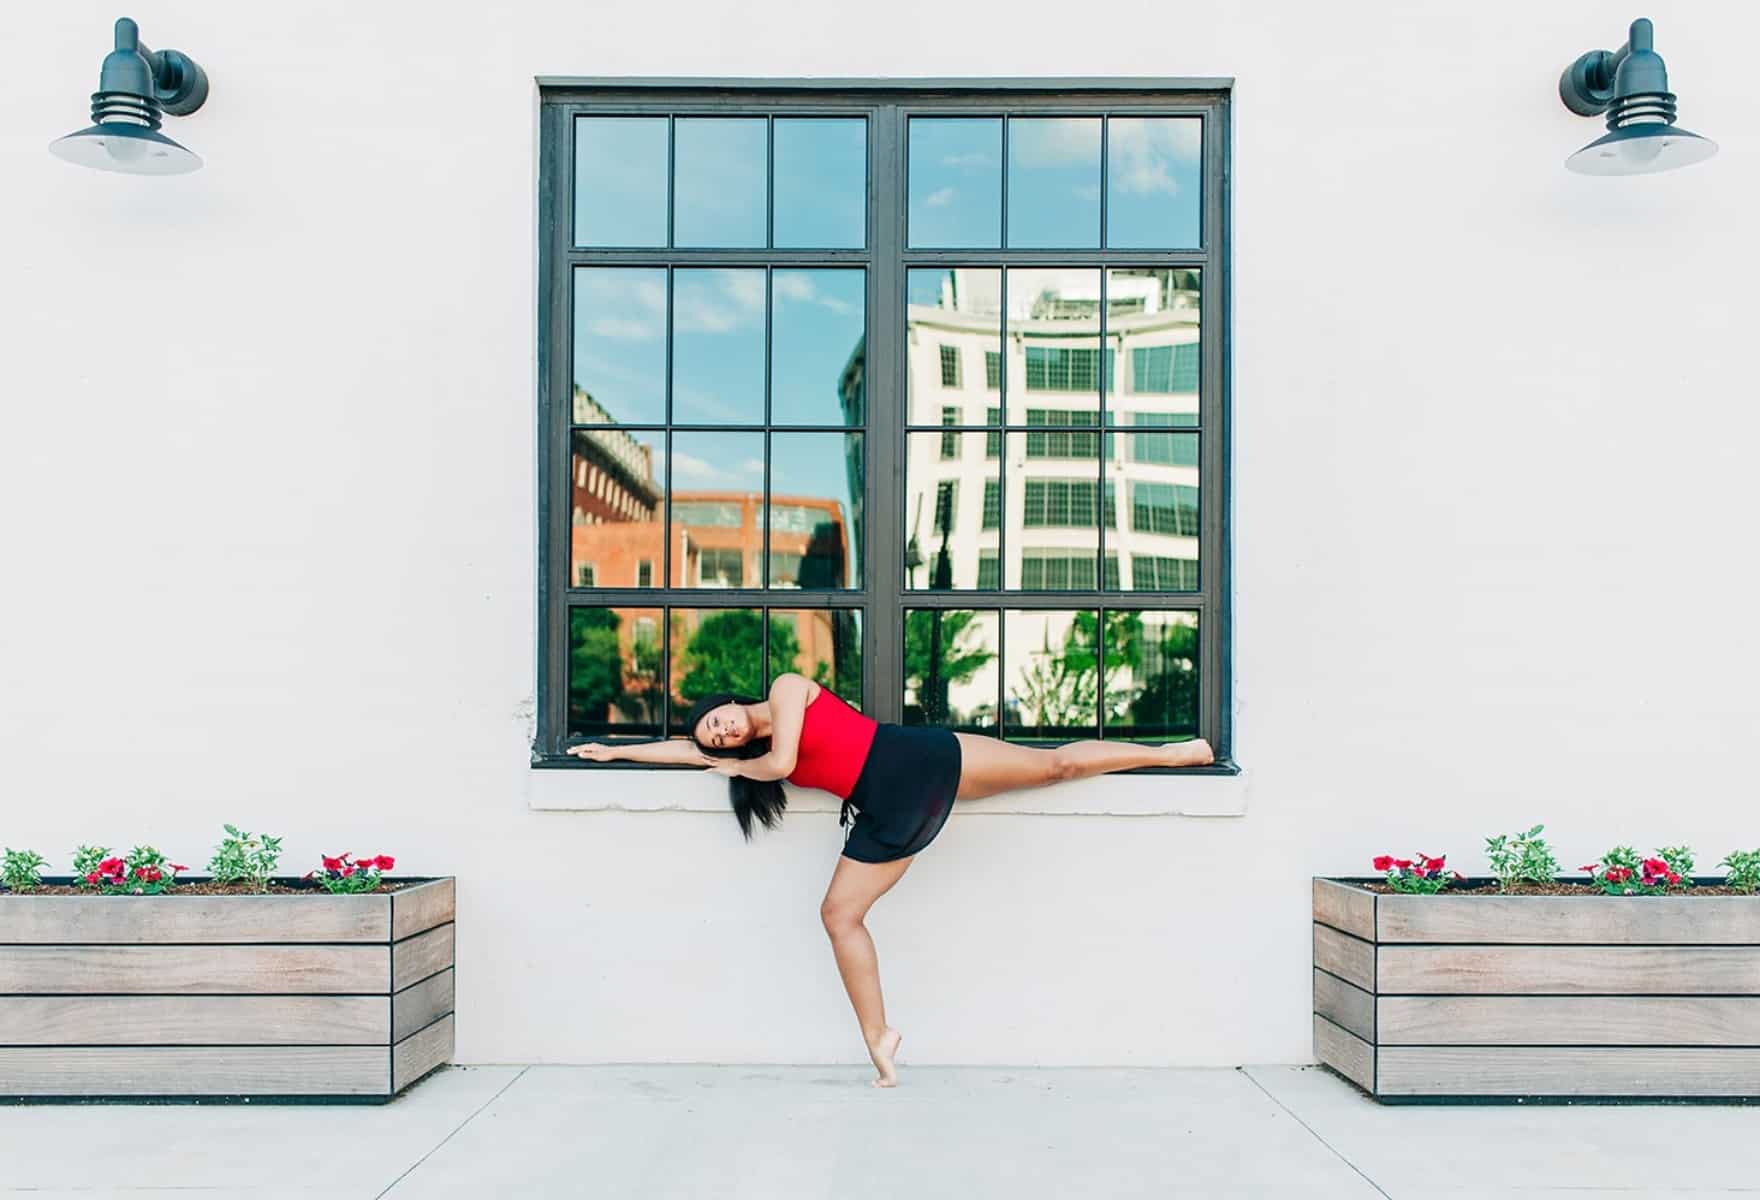 Ballet dancer in a red shirt performing in front of a window, with flowers on each side